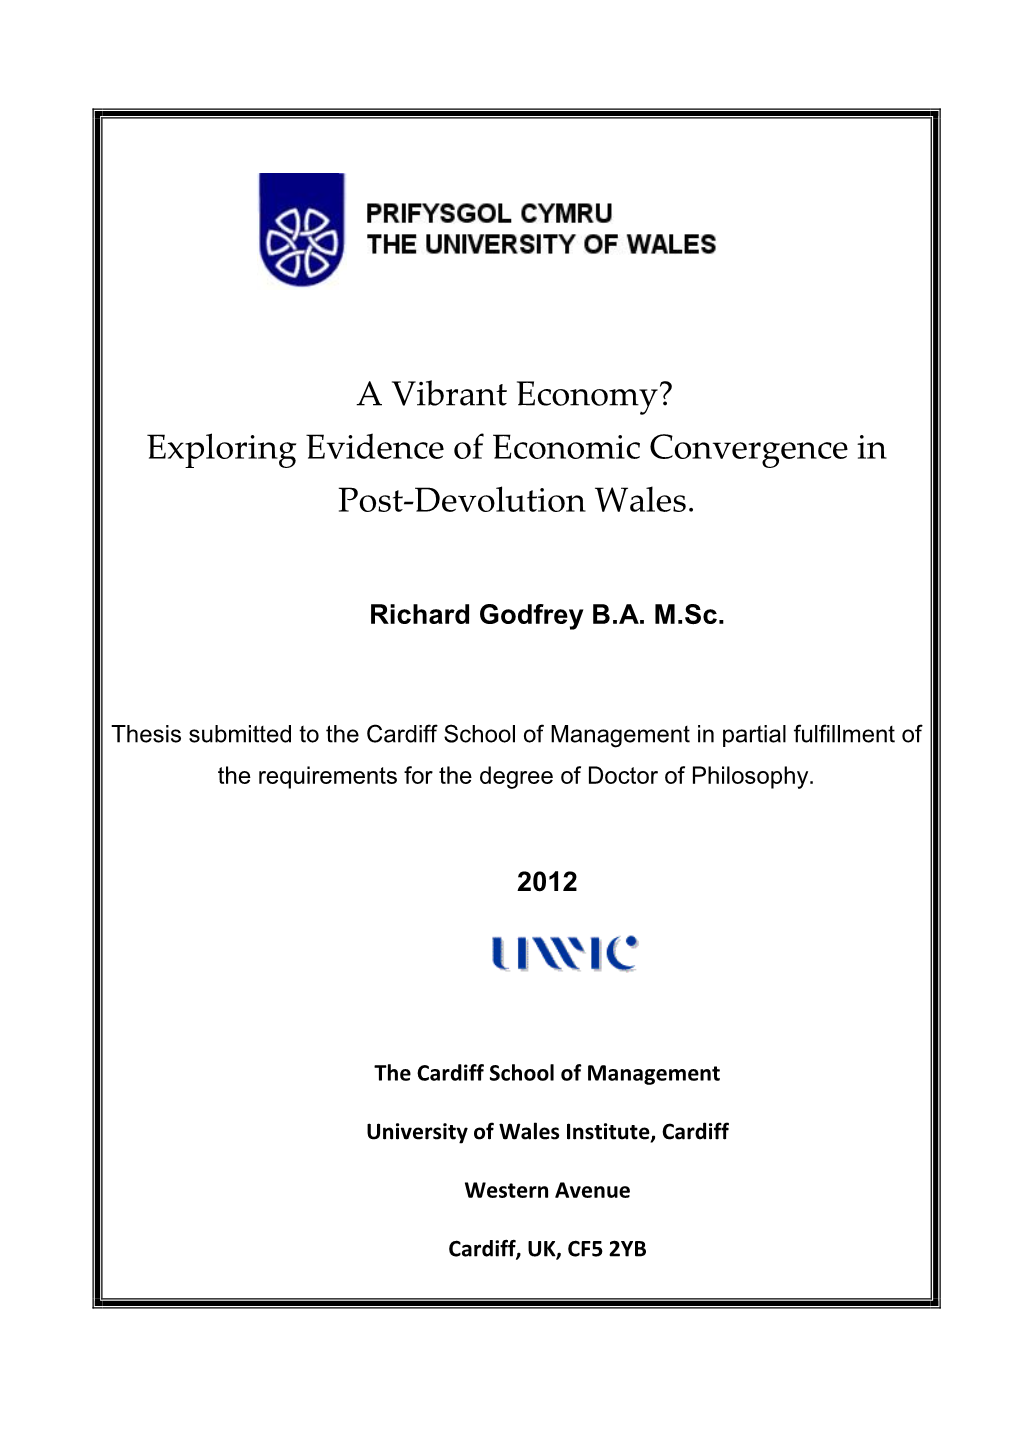 A Vibrant Economy? Exploring Evidence of Economic Convergence in Post-Devolution Wales